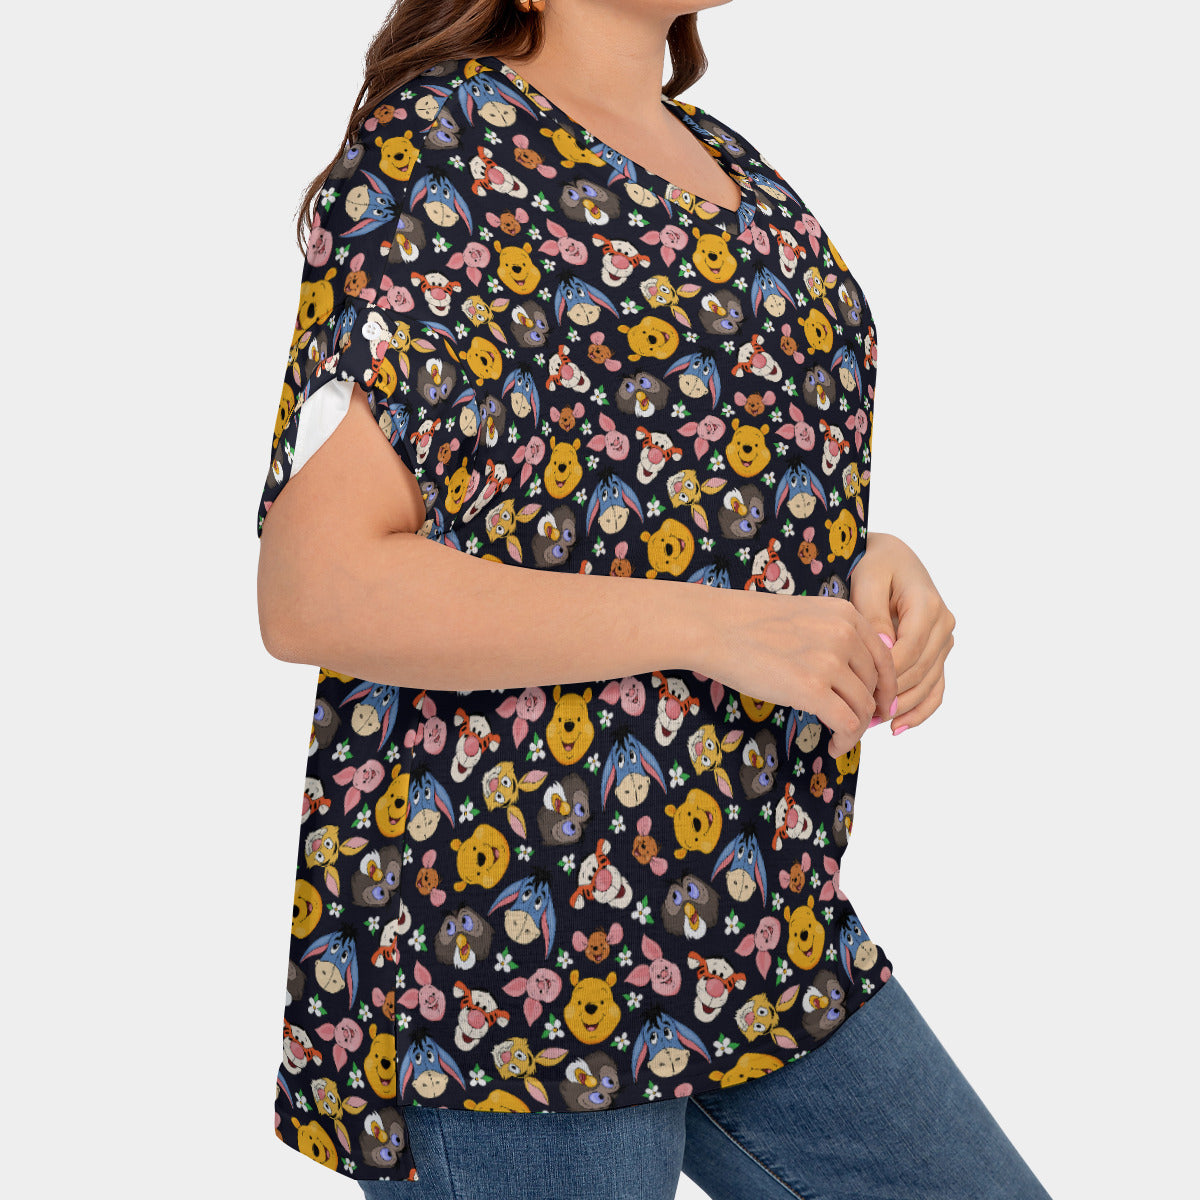 Hundred Acre Wood Friends Women's Plus Size Short Sleeve T-shirt With Sleeve Loops